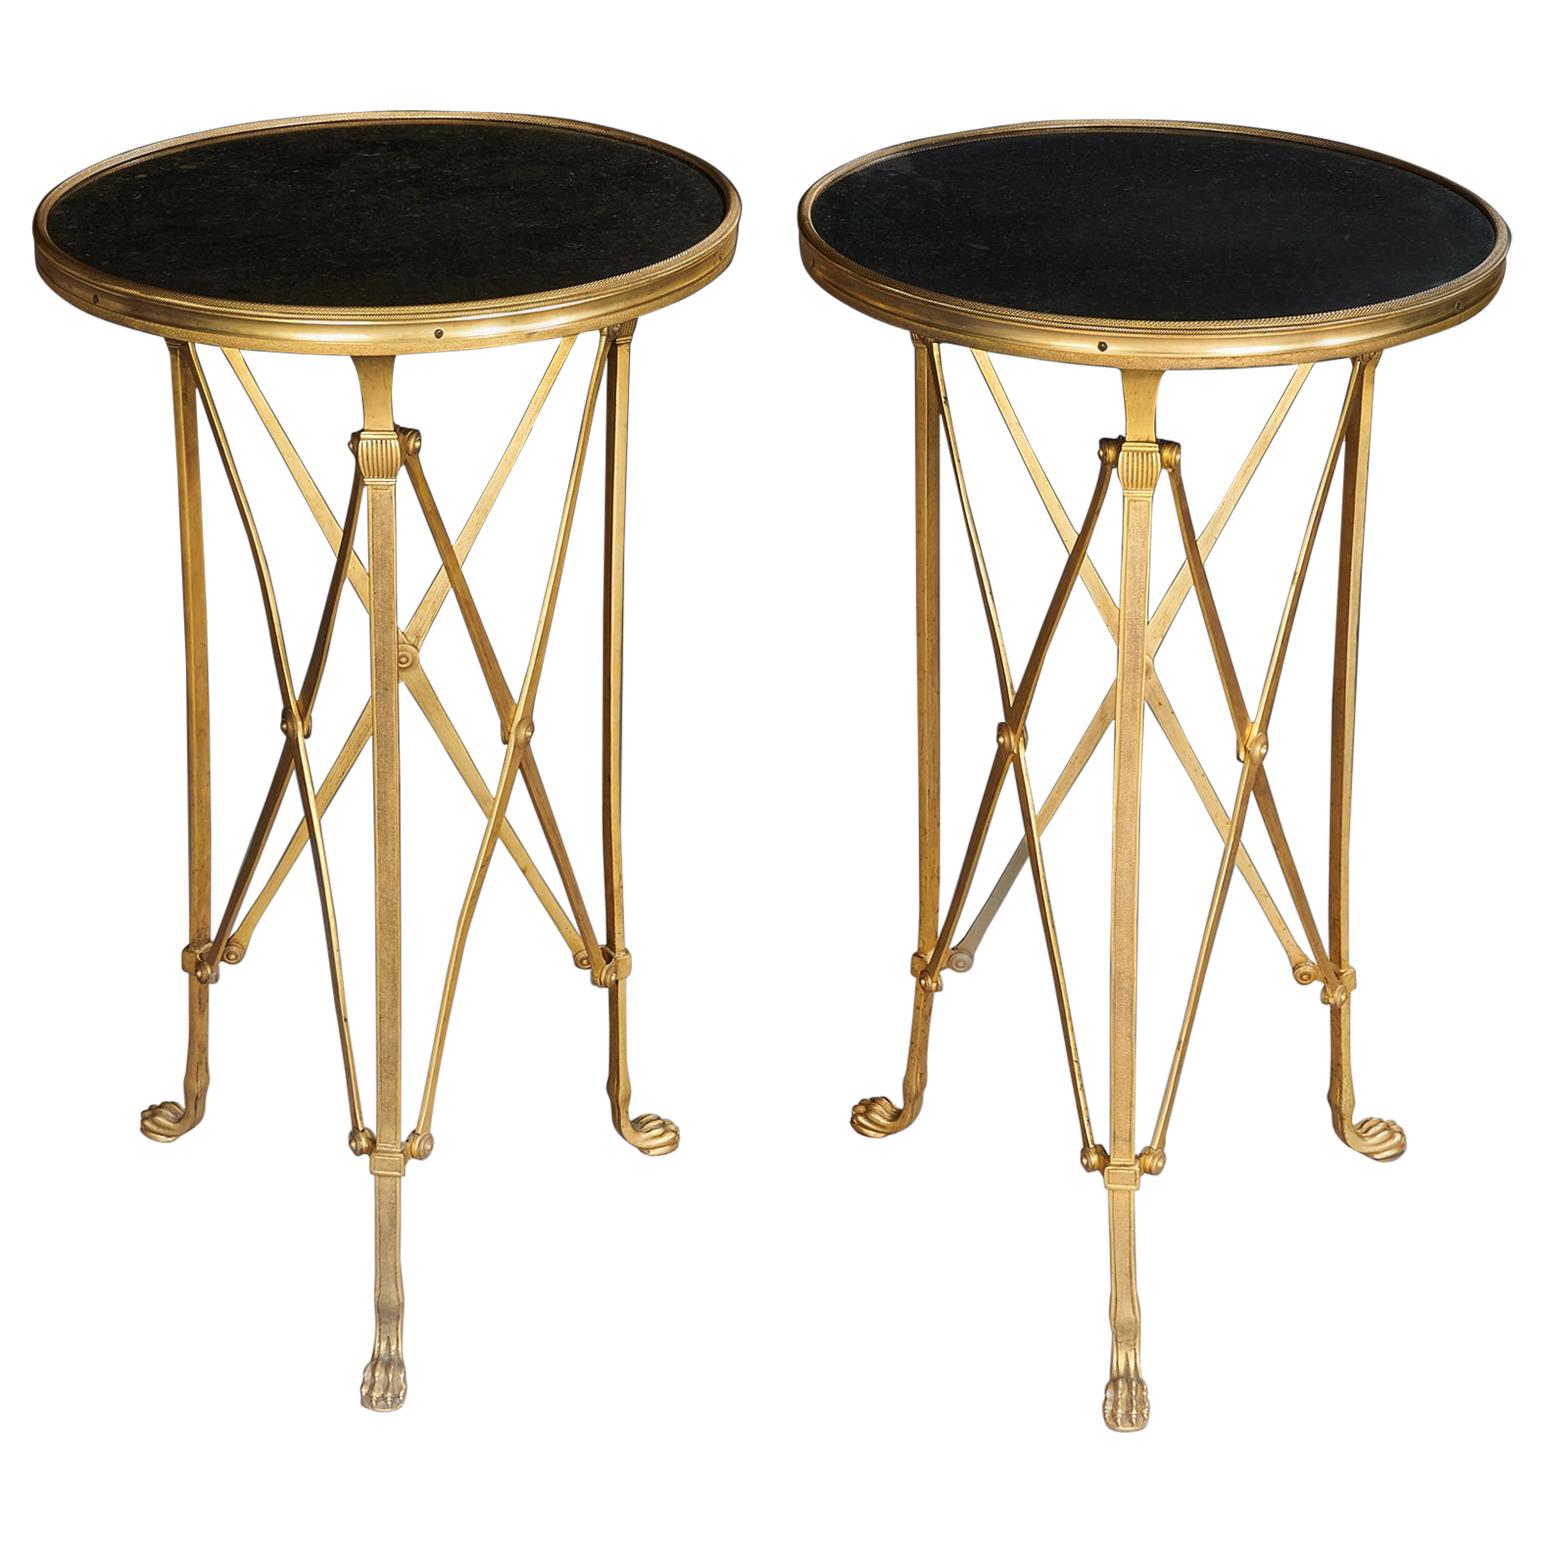 Pair of Gilt Bronze and Marble Topped French Gueridon Tables